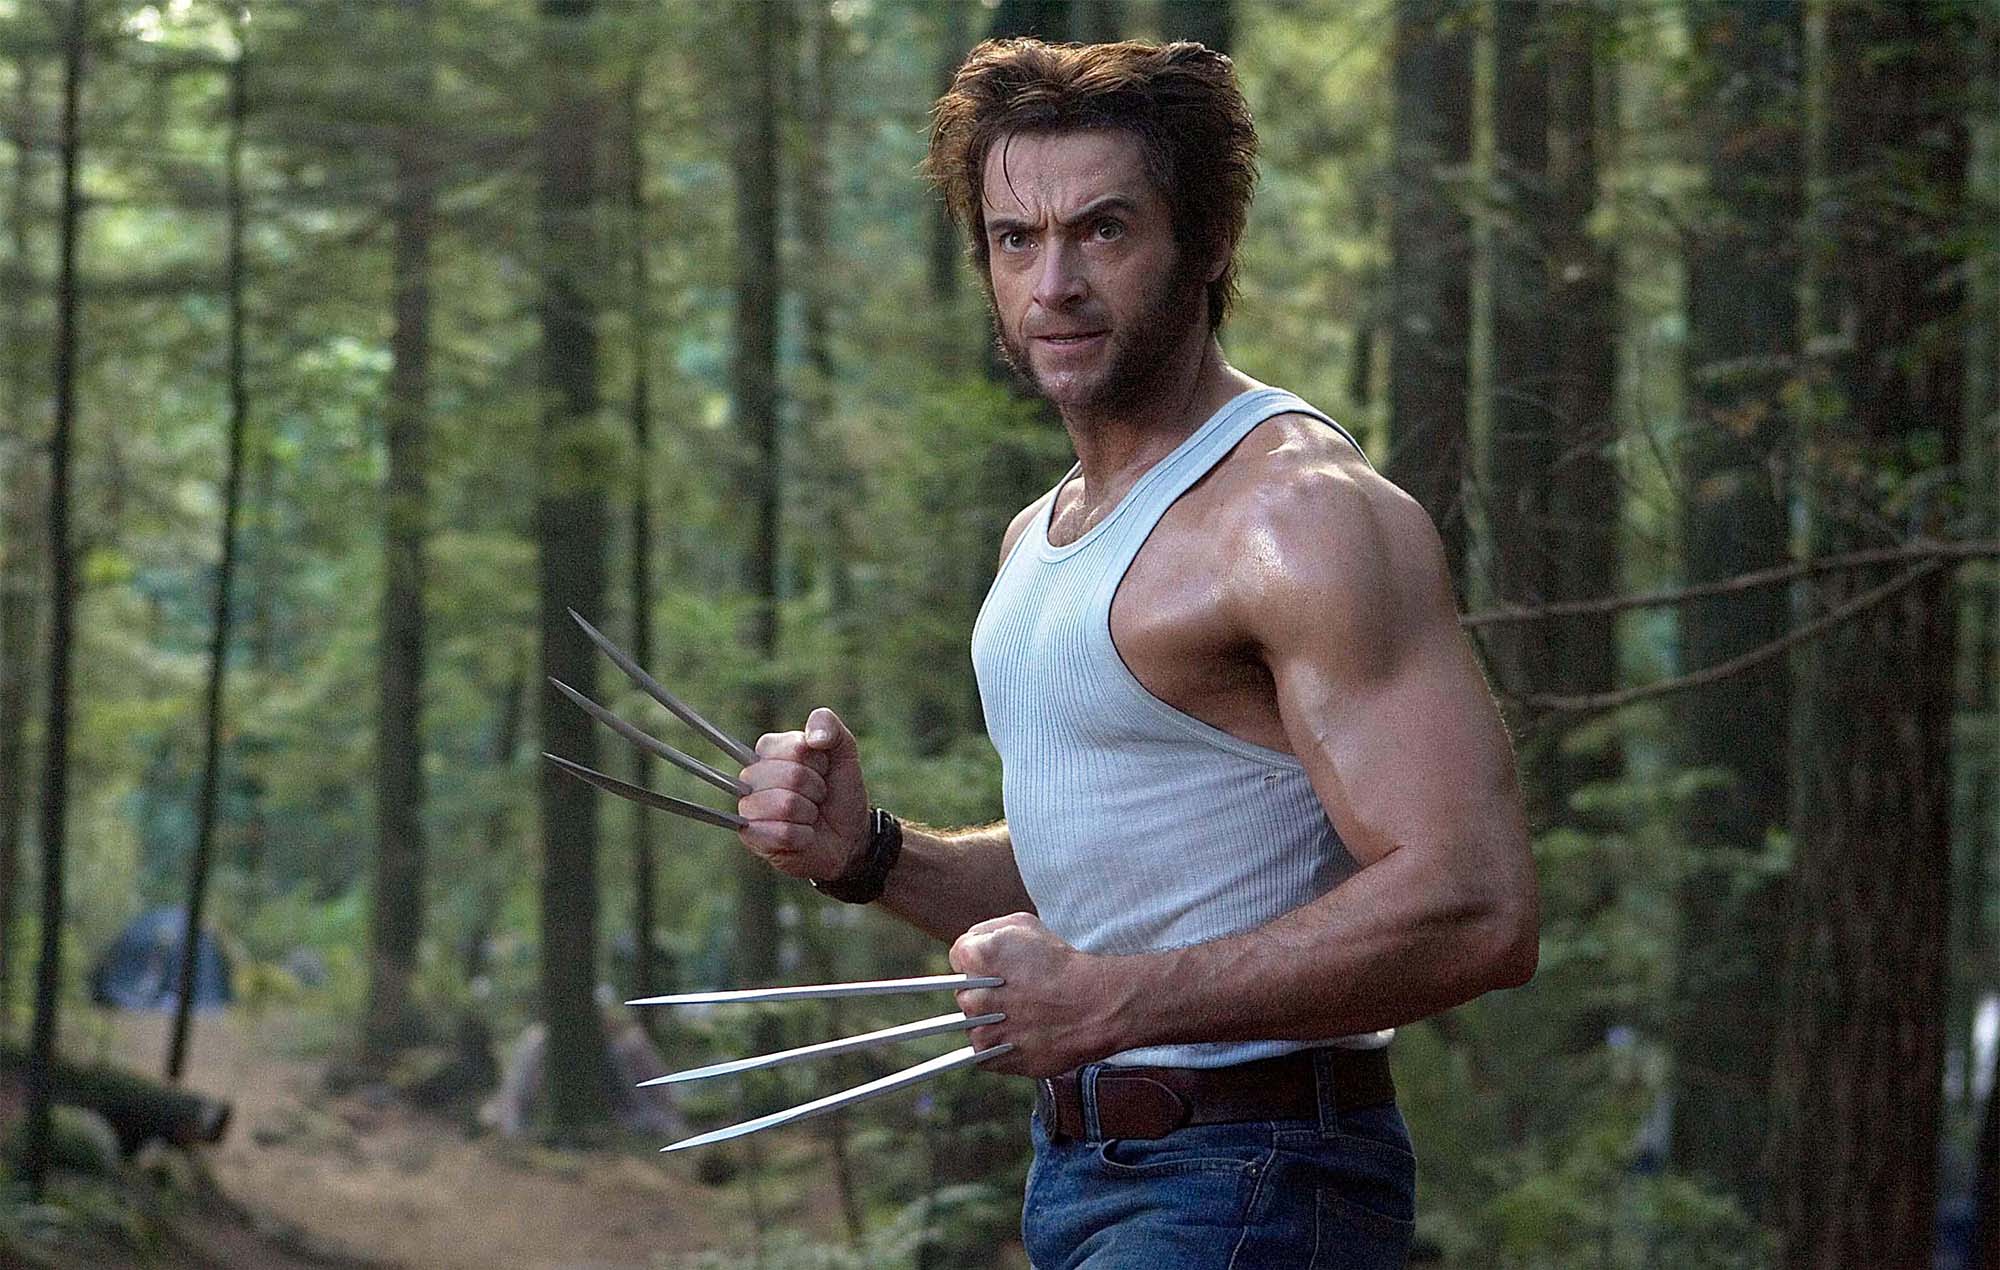 Hugh Jackman says Wolverine’s growling and yelling damaged his voice